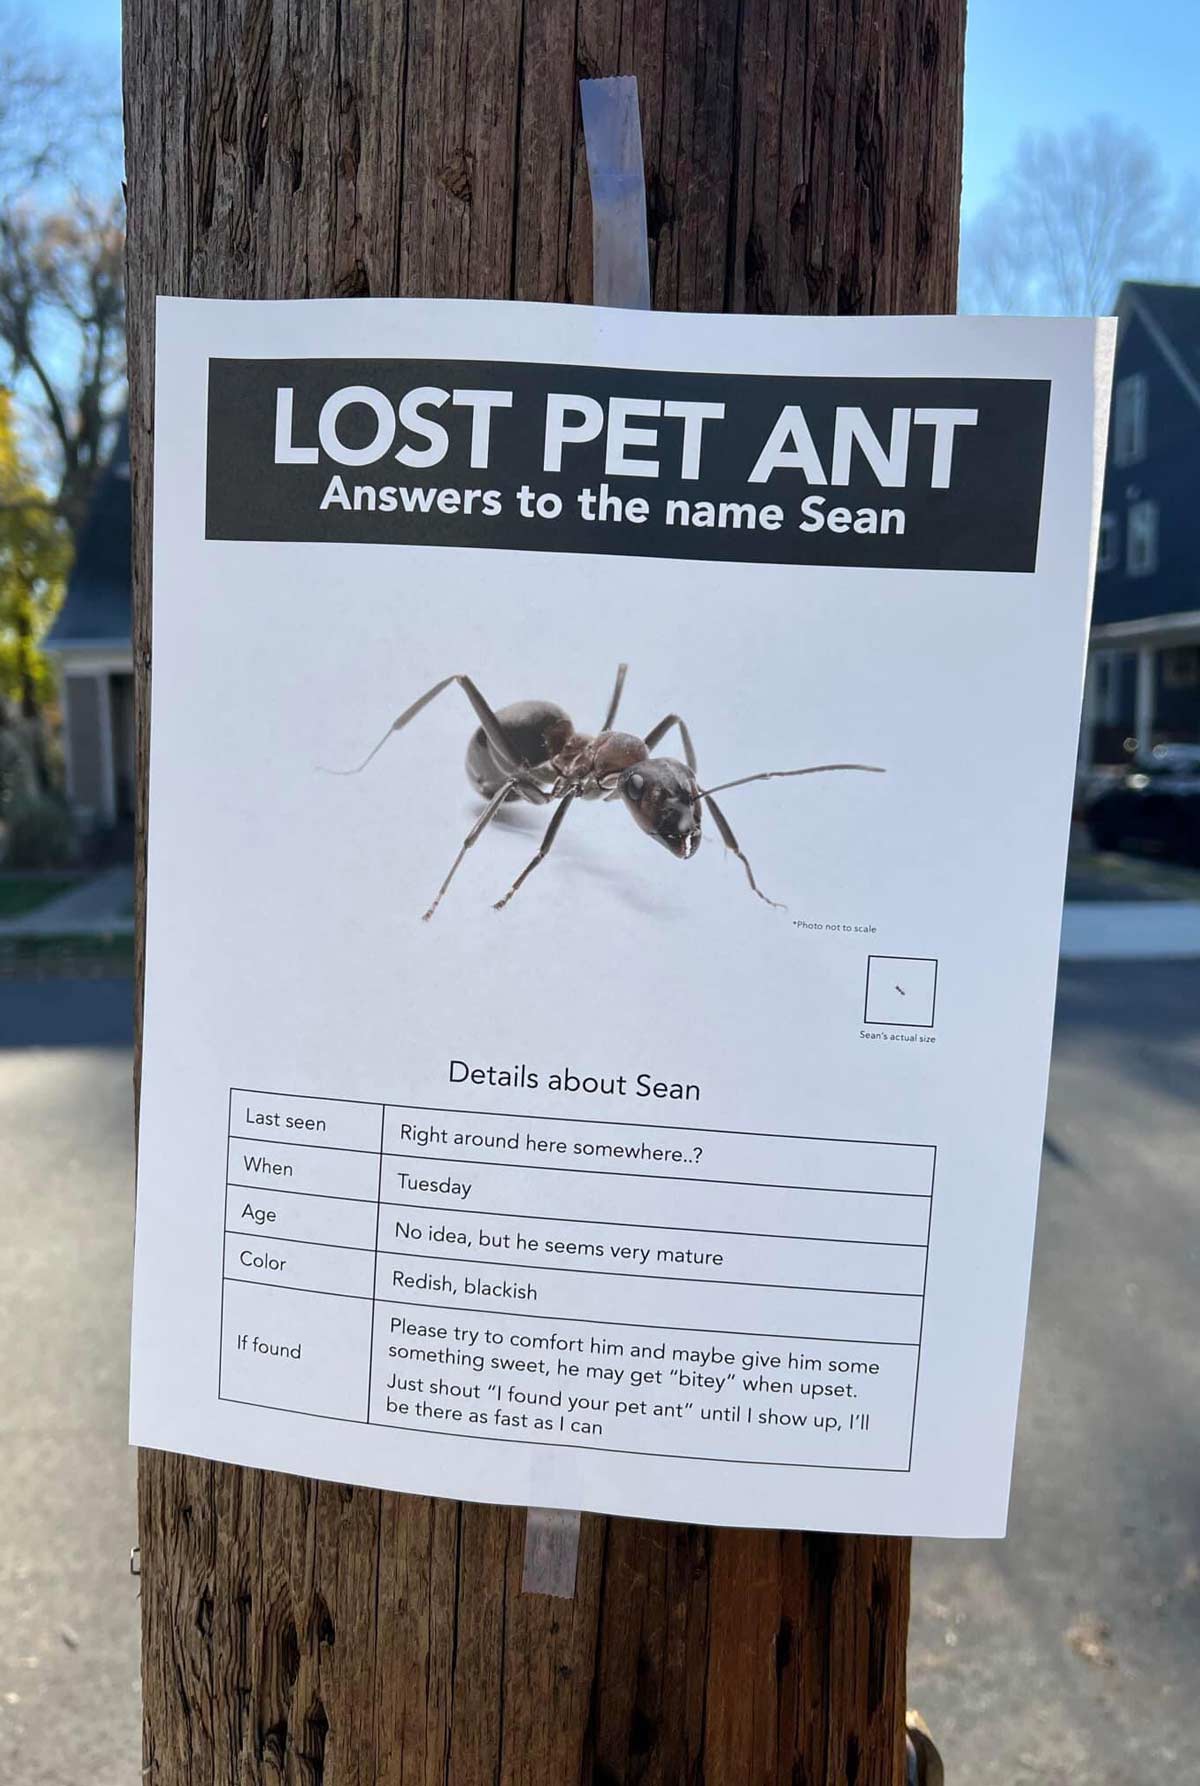 pics and memes daily dose - tree - Lost Pet Ant Answers to the name Sean Last seen When Age Color If found Details about Sean Photo not to scale Sean's actual size Right around here somewhere..? Tuesday No idea, but he seems very mature Redish, blackish P